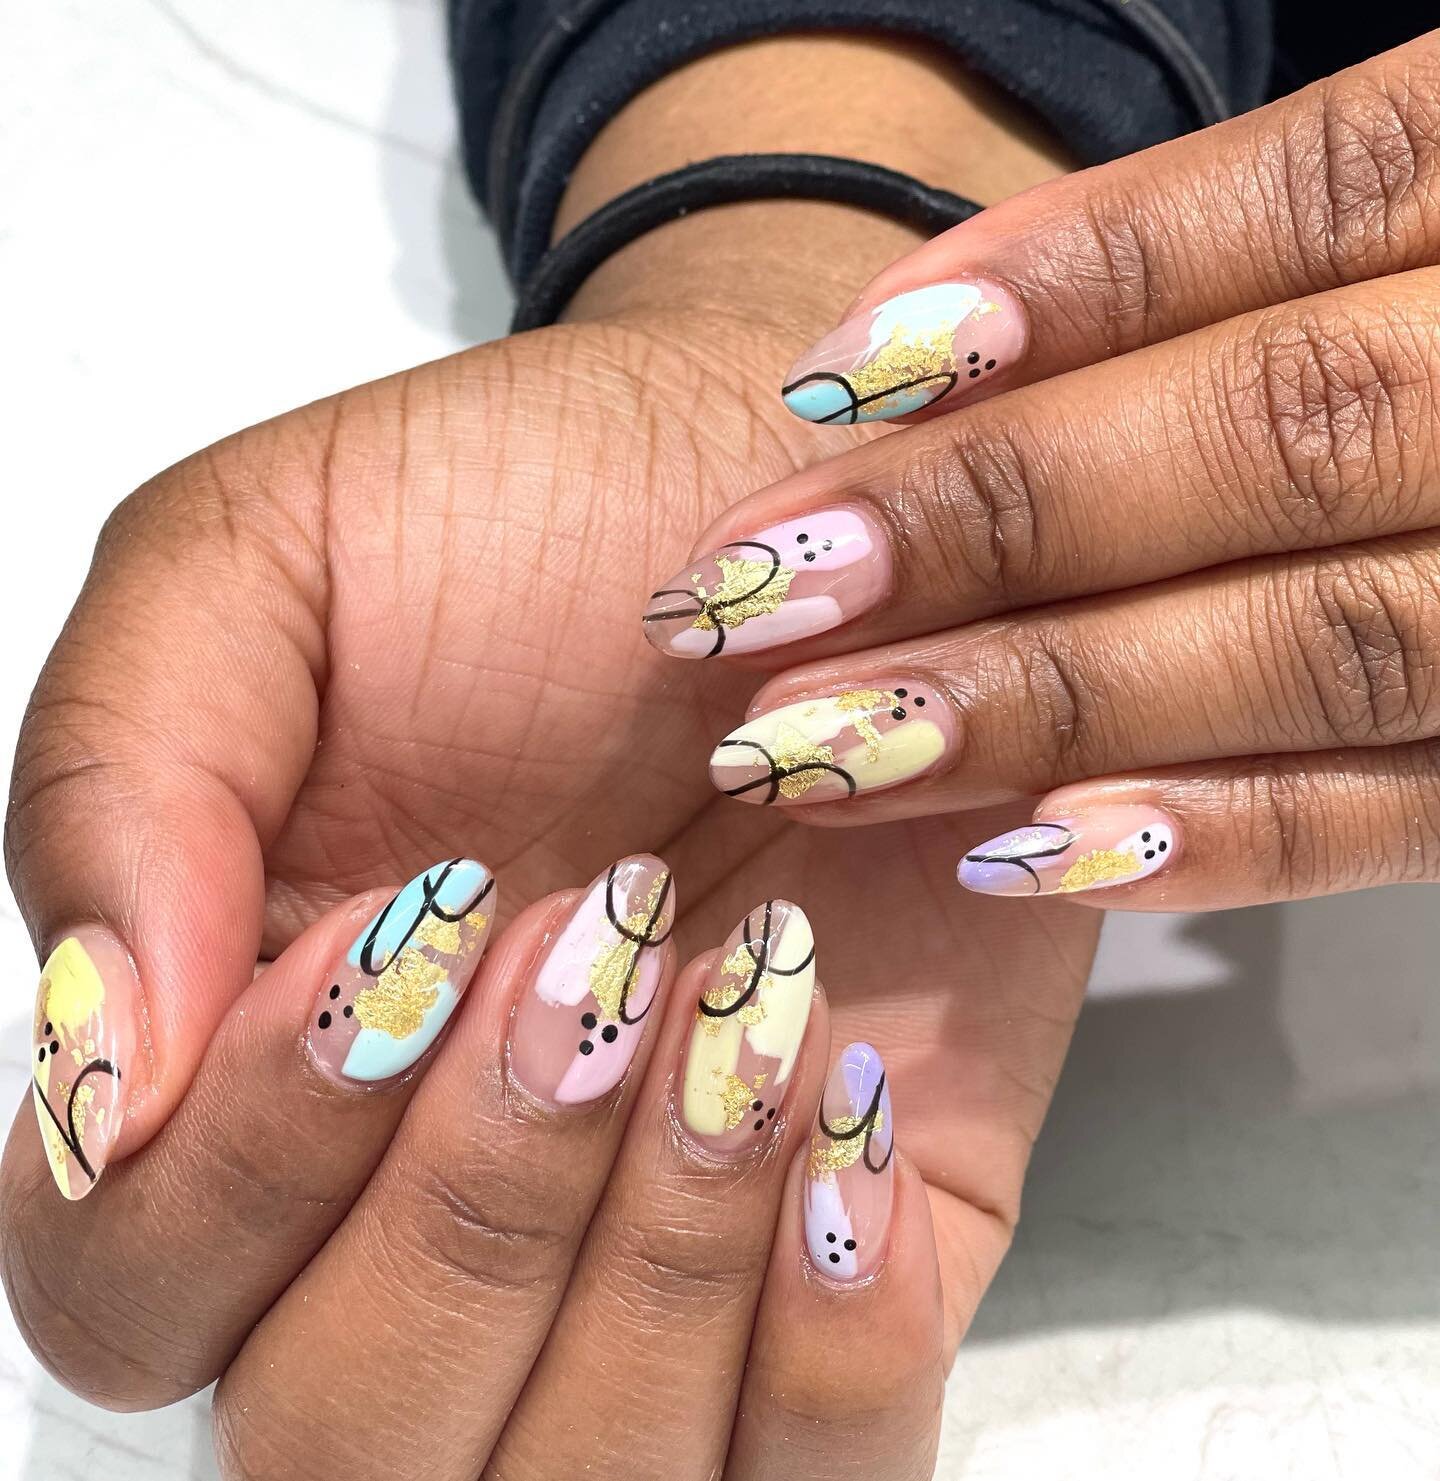 LEVEL OF COMPLEXITY: MEDIUM 10 NAILS. Spring nails ☺️🌼🌸 the weather is finally getting warmer! ☀️ #nails #springbreak #summer #nailsofig #nailsofboston #bostonnails #bns #boston #bostonsnailsandspa #bostonnailsalon #ignails #bostongelx #gelxboston 